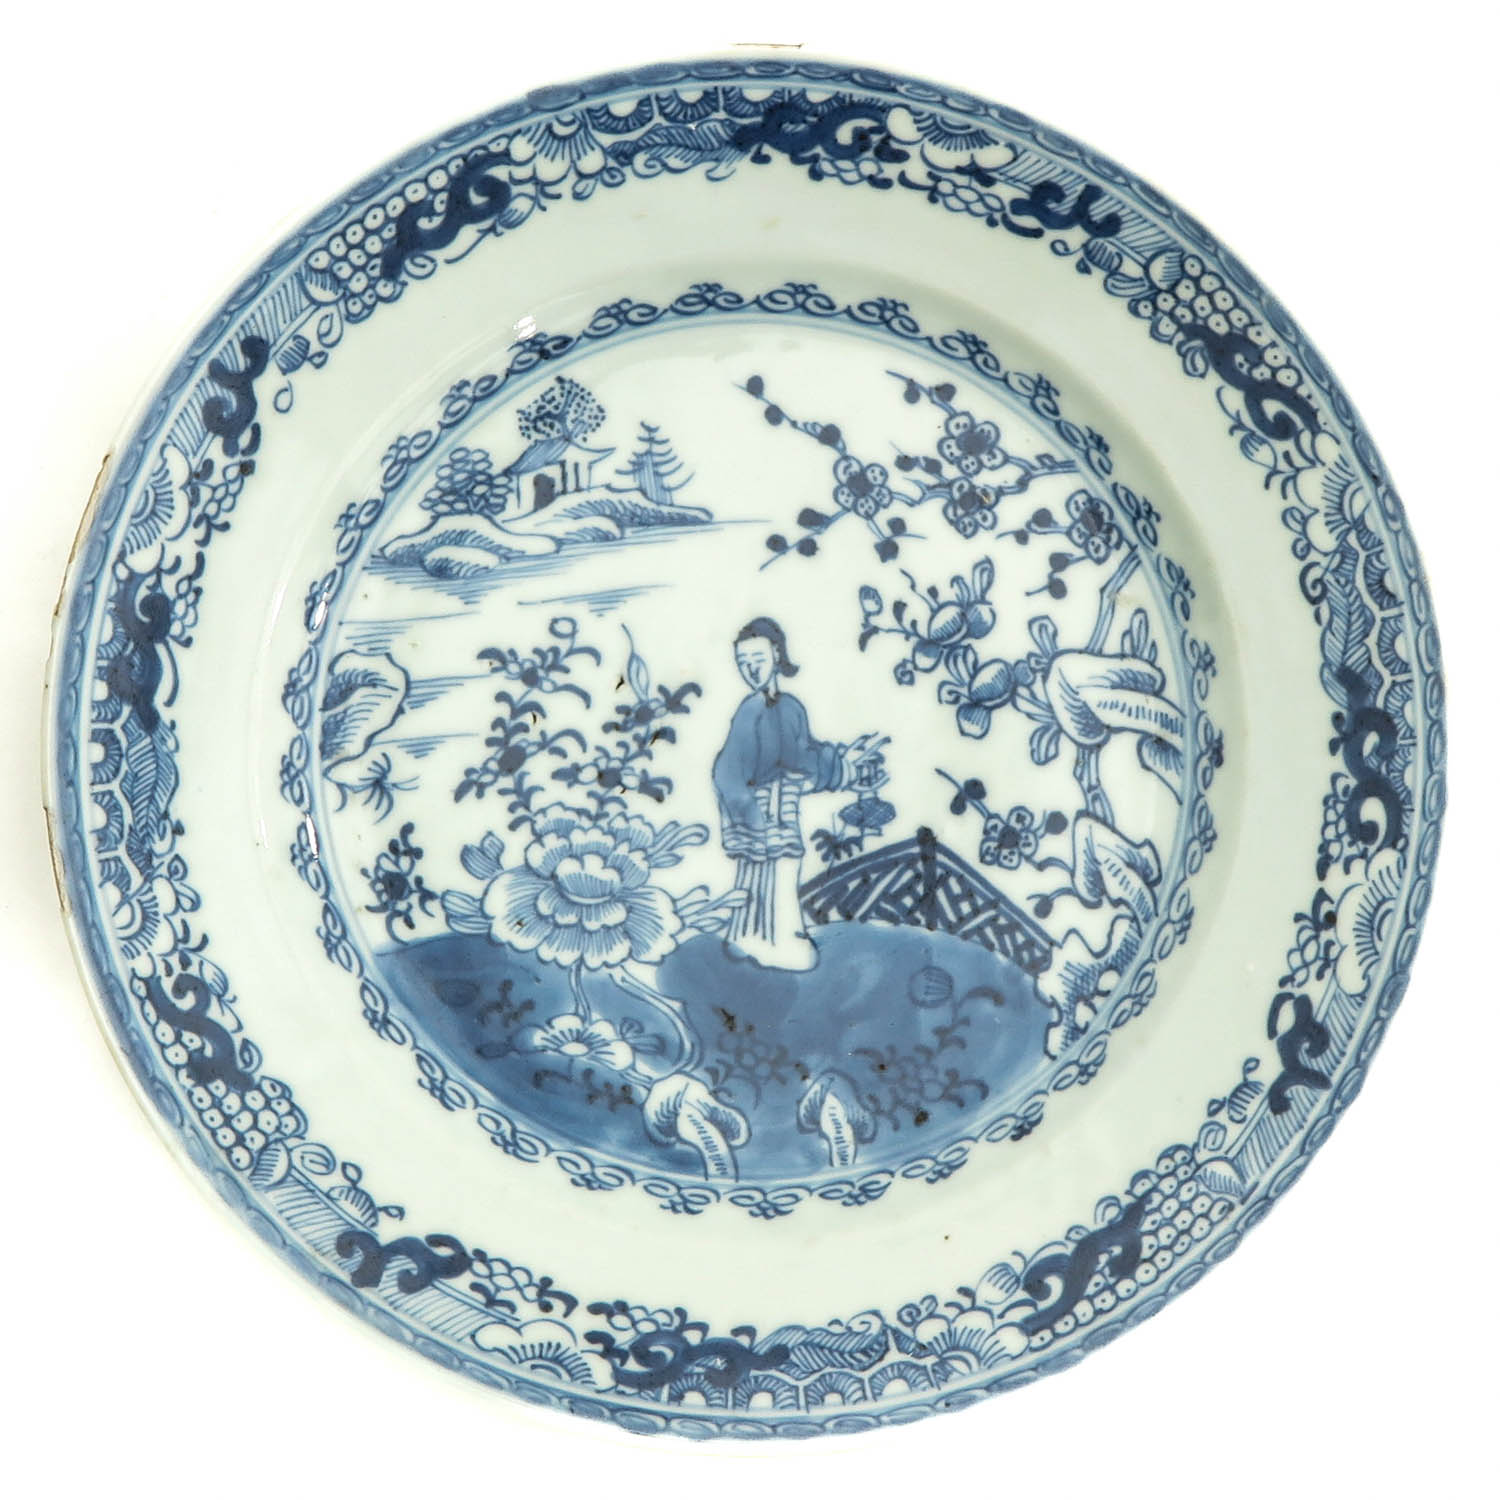 A Series of 3 Blue and White Plates - Image 5 of 10